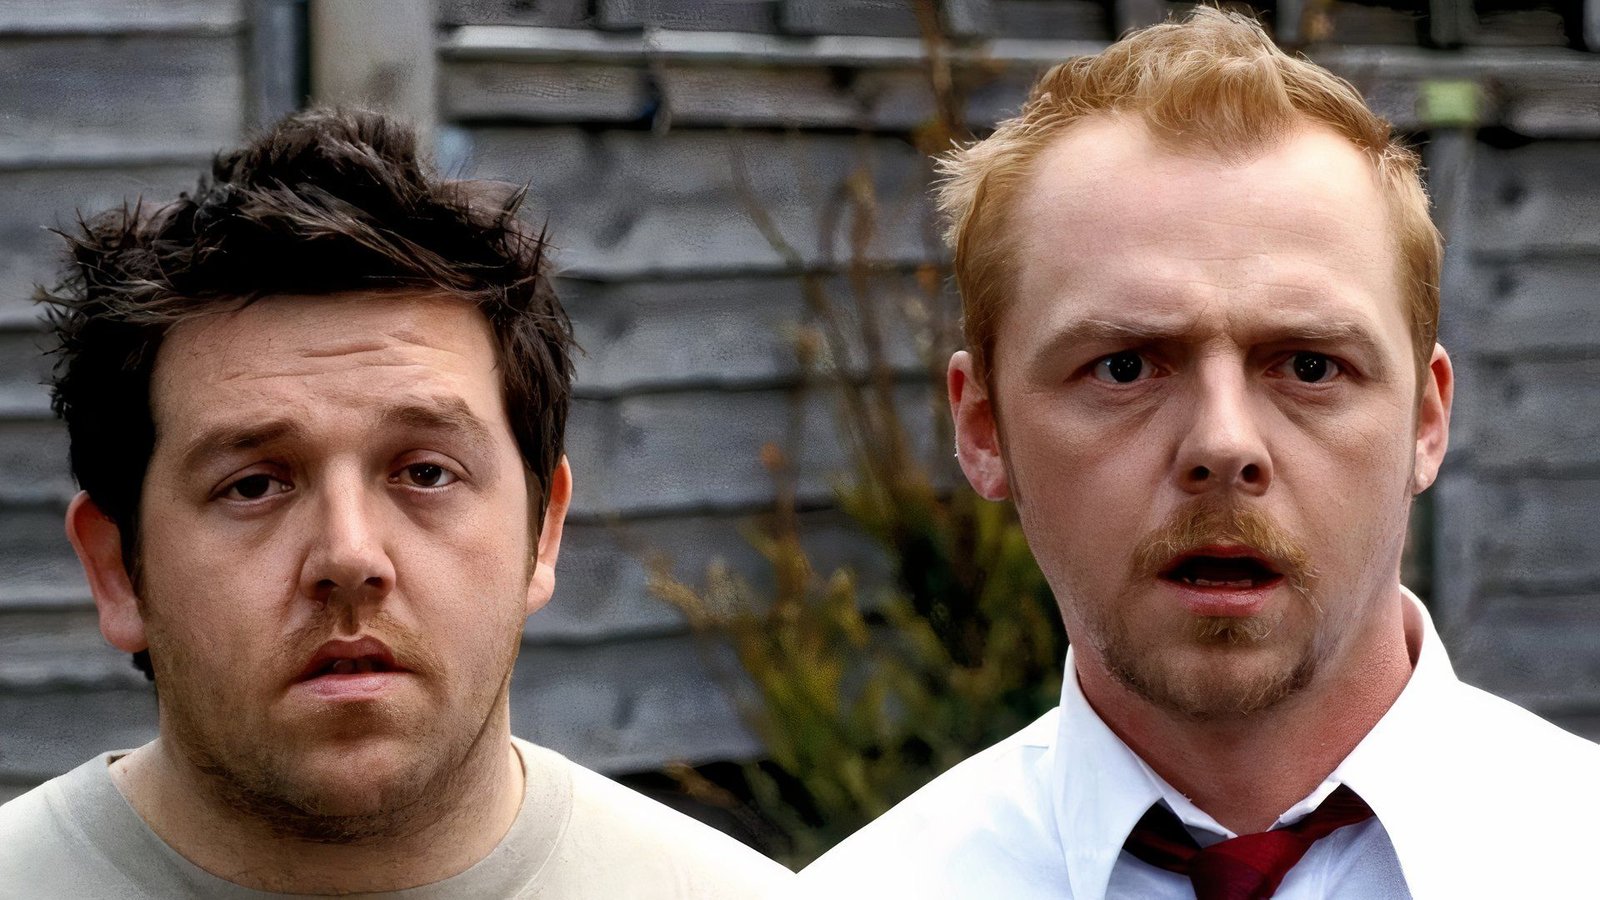 Simon Pegg Defends the Outdated & Offensive Parts of Shaun of the Dead: 'It’s a Joke'